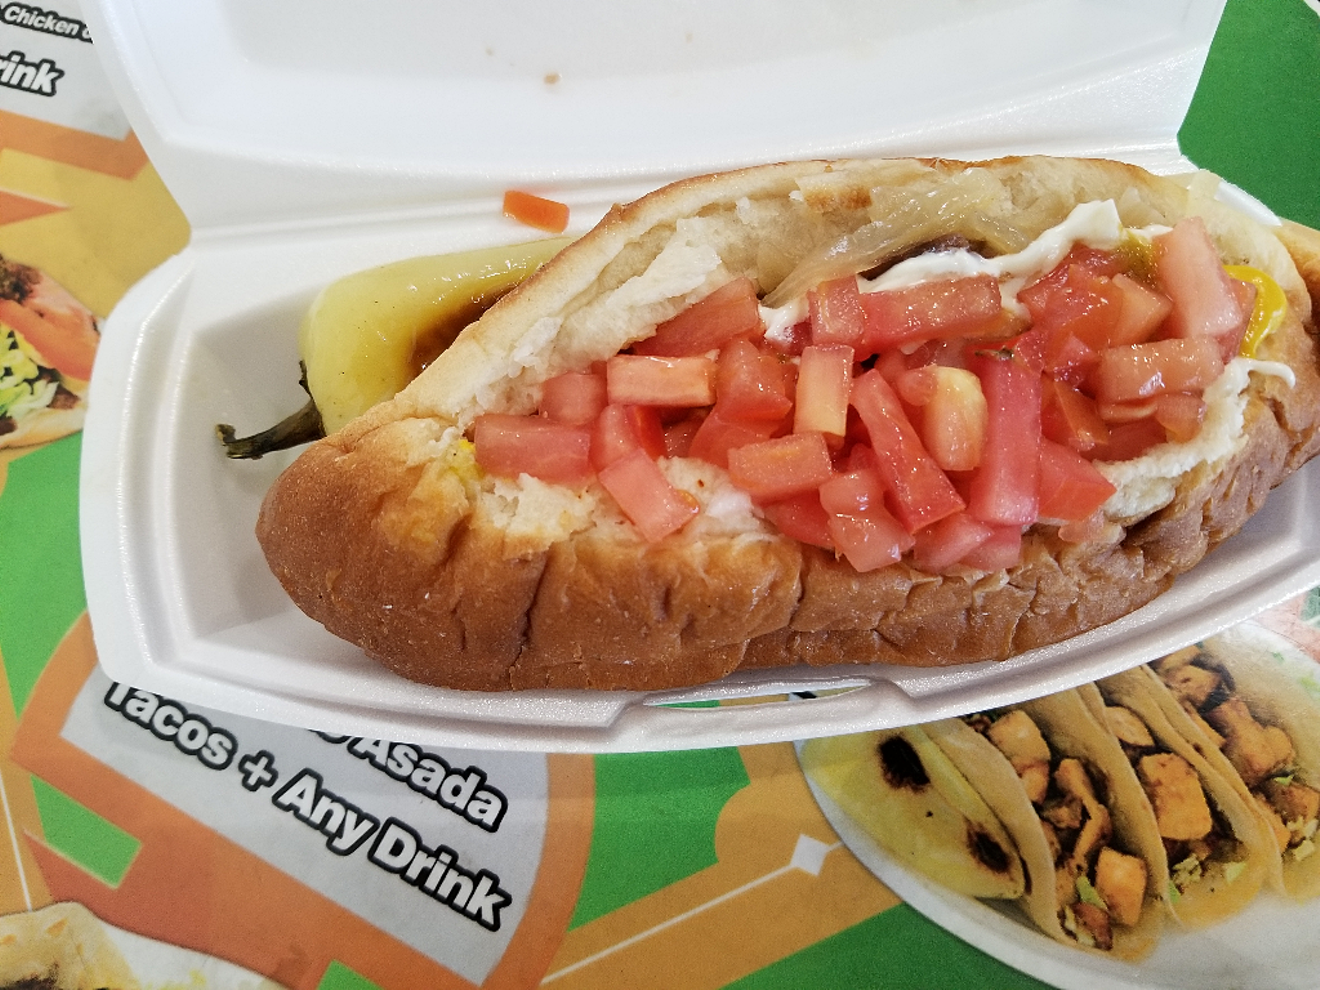 A Sonoran hot dog, with chile guero on the side, from the Phoenix location of El Guero Canelo.